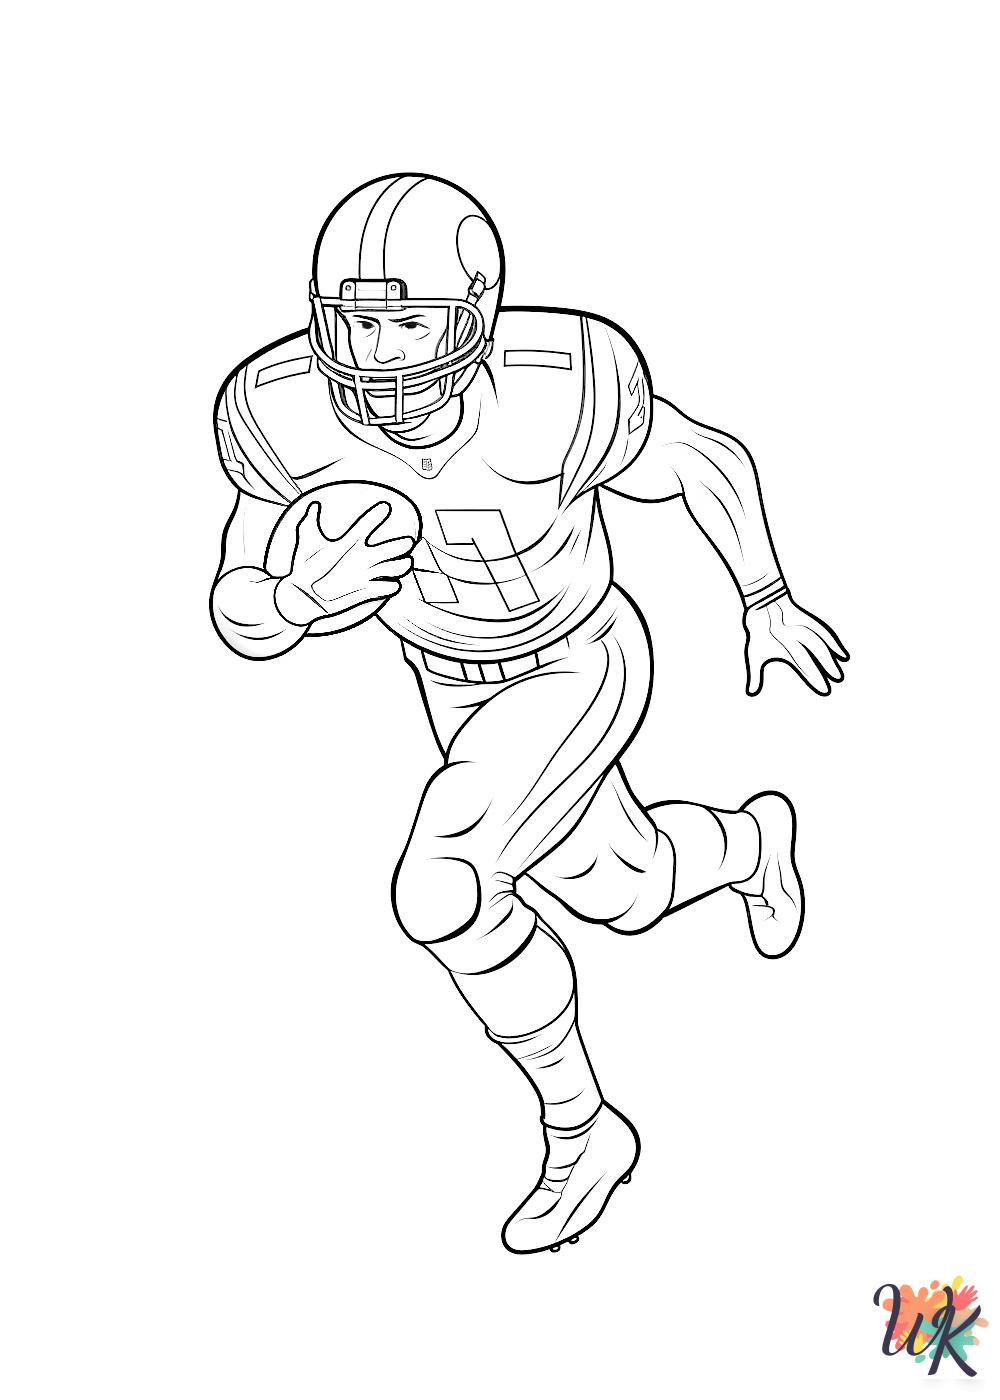 NFL free coloring pages 1